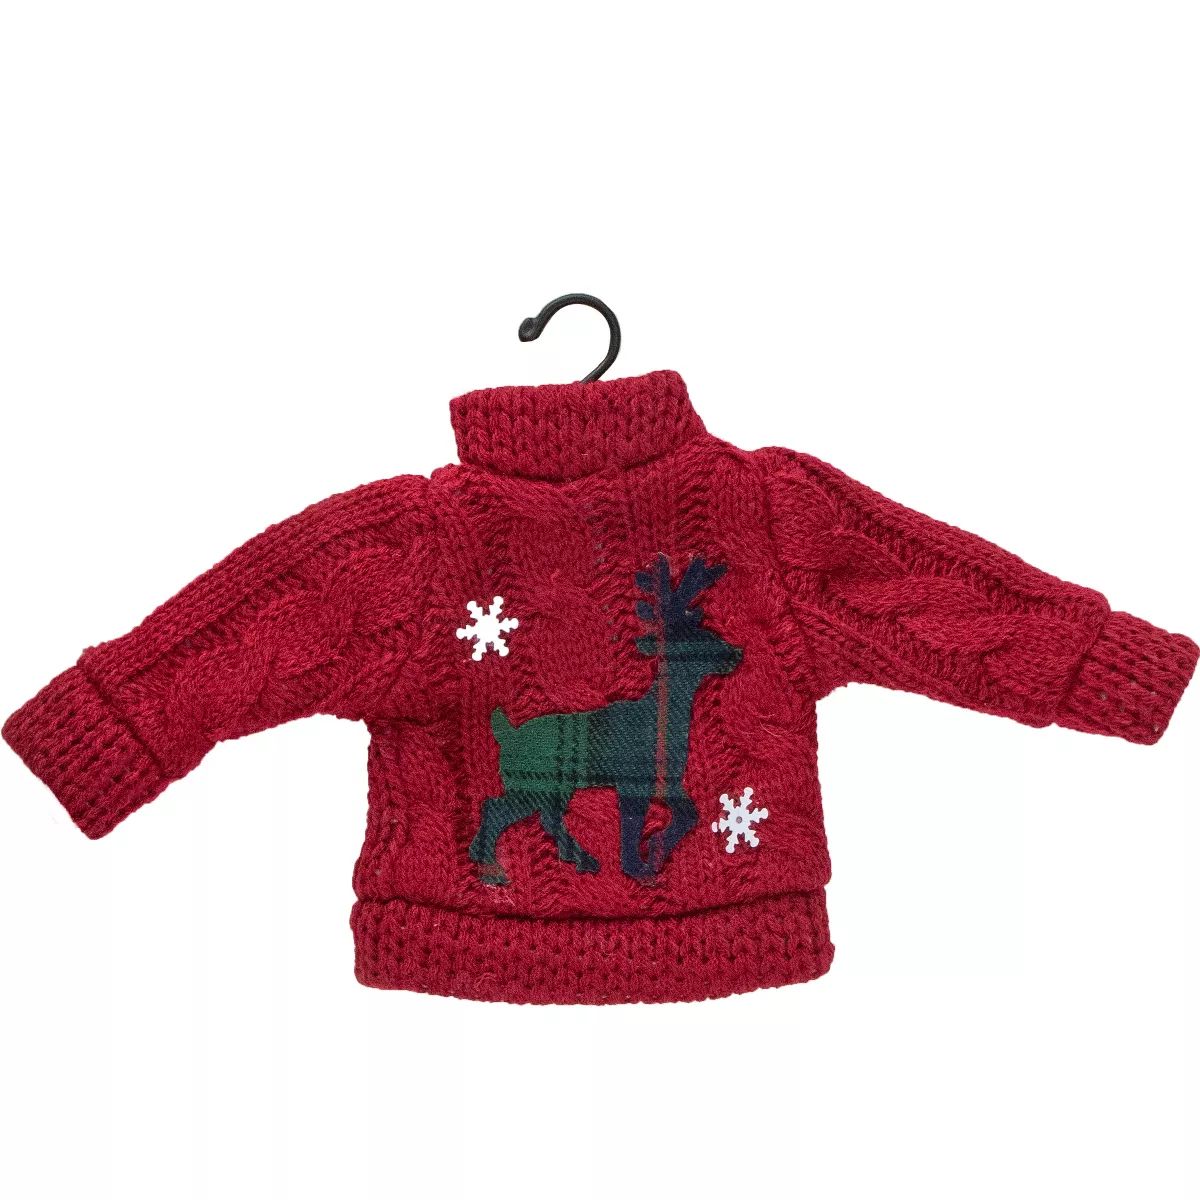 Northlight 8" Red Sweater with Plaid Reindeer Christmas Ornament | Target